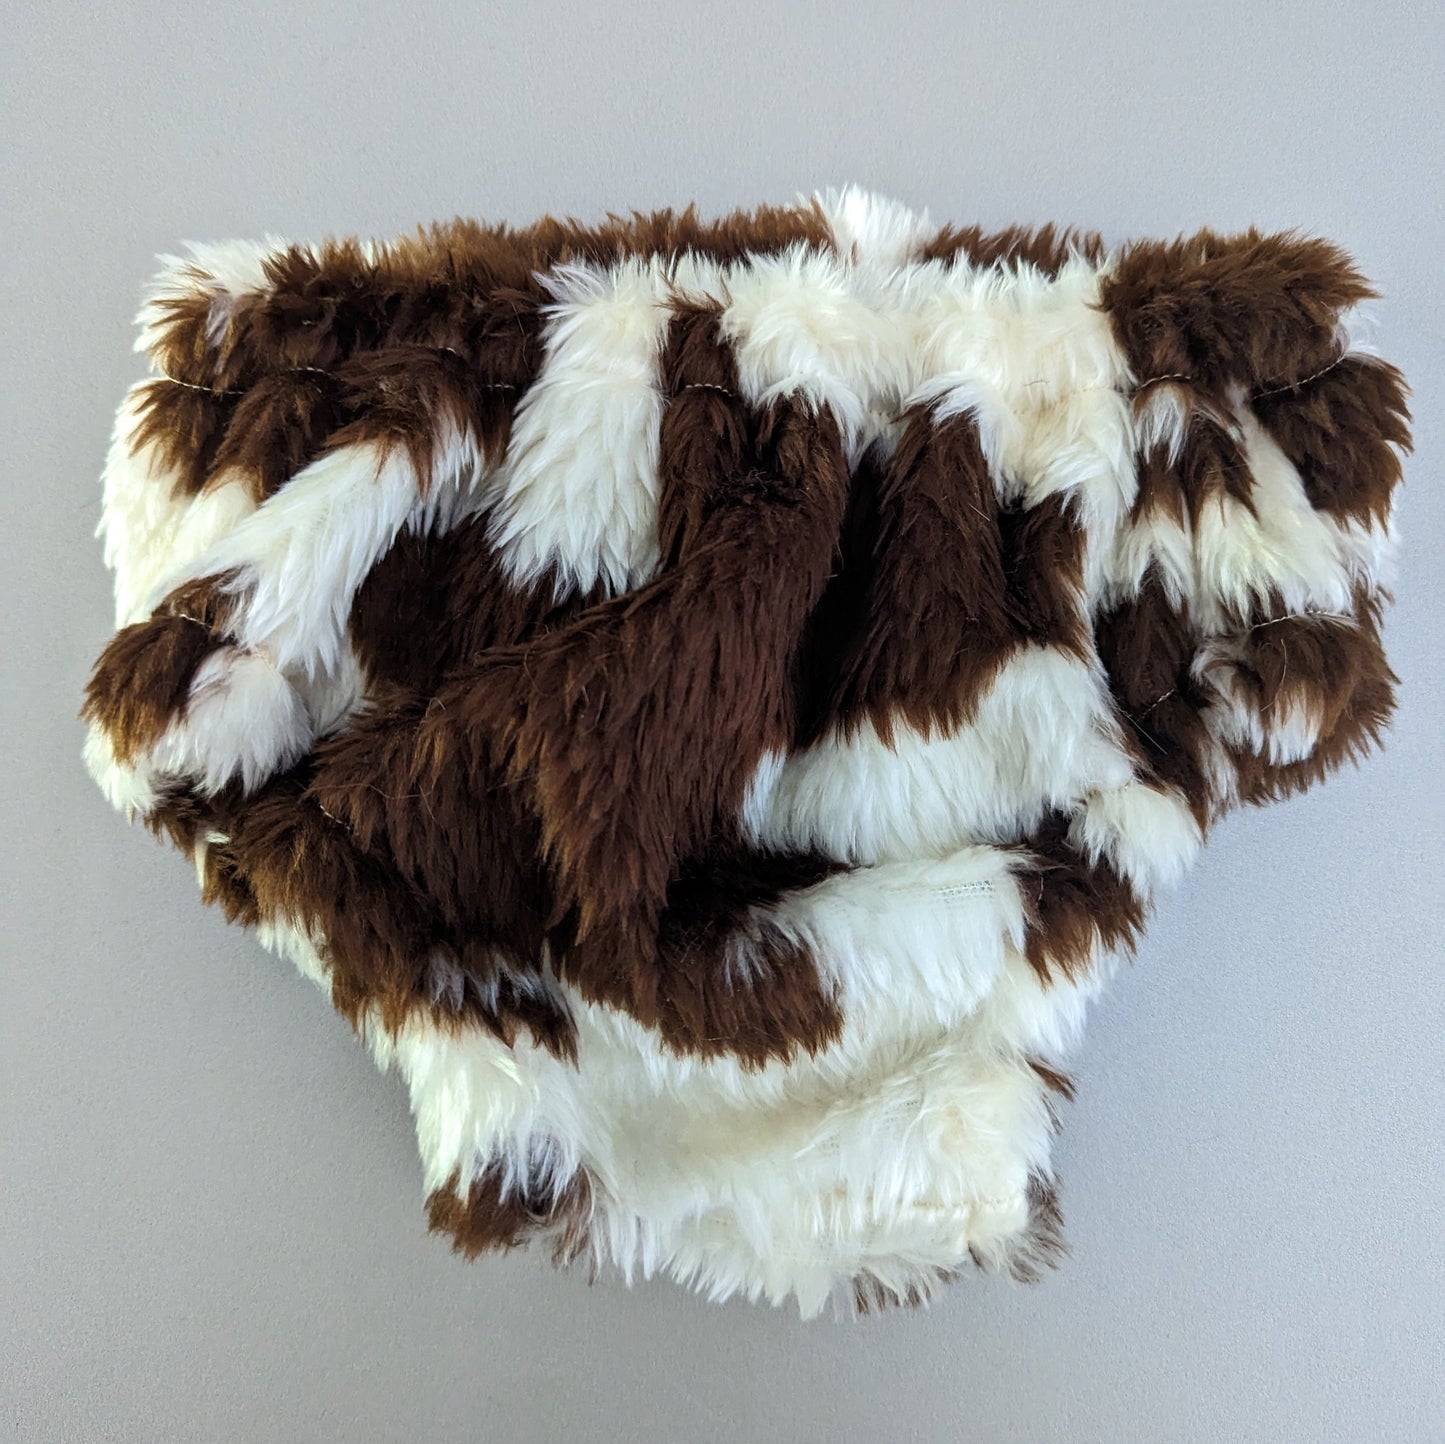 FAUX FUR - COW - Fake Animal Hair Baby Nappy Cover, Size 1 (12-24 months)